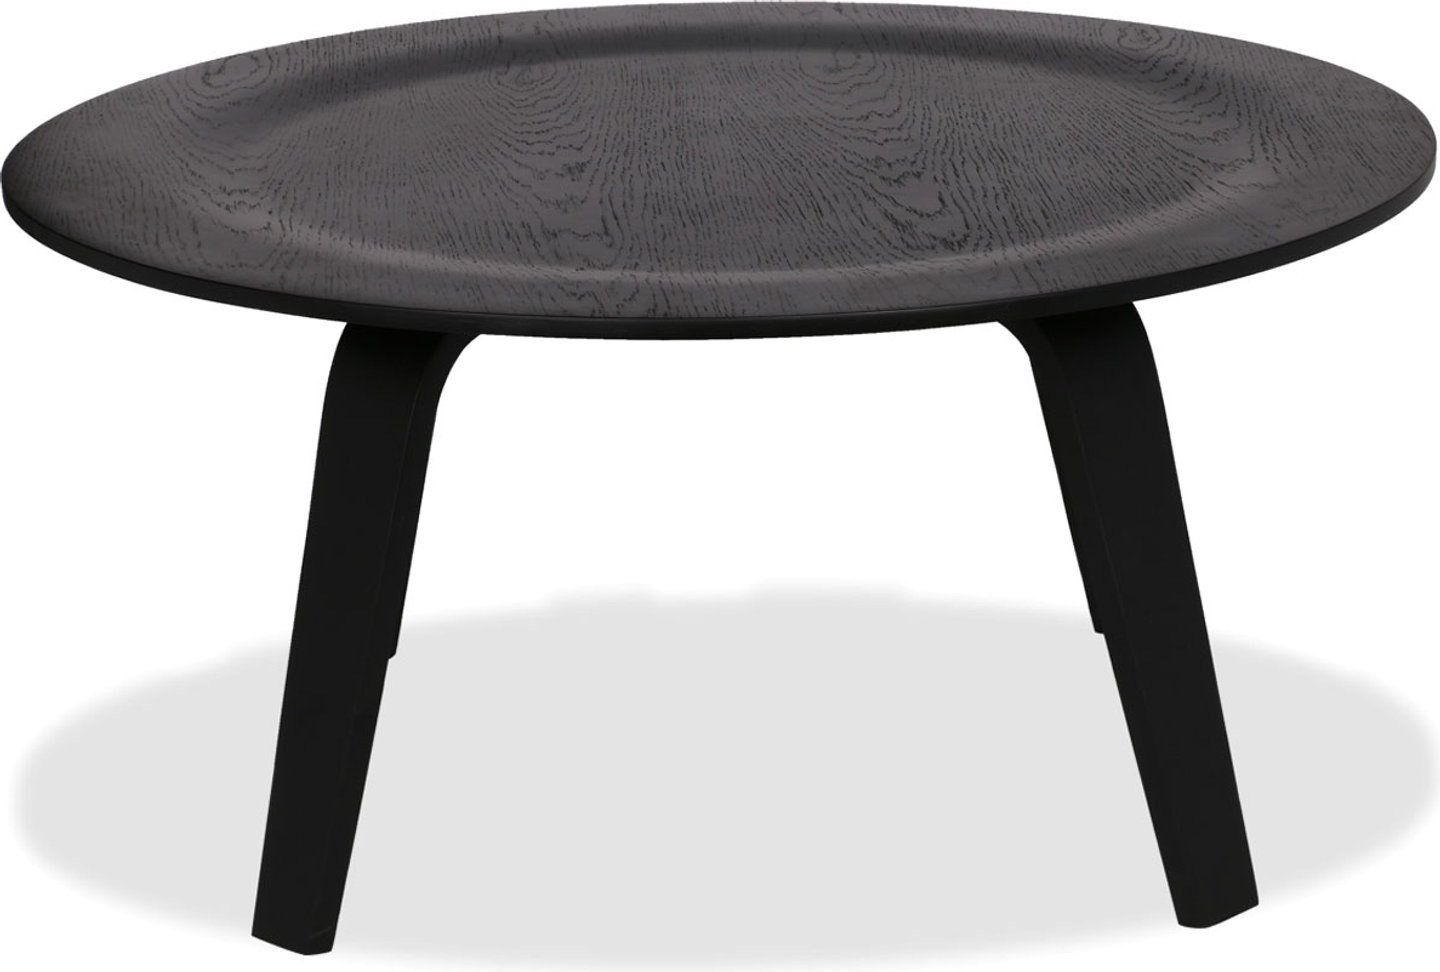 Eames Style Sperrholz Couchtisch Black image.